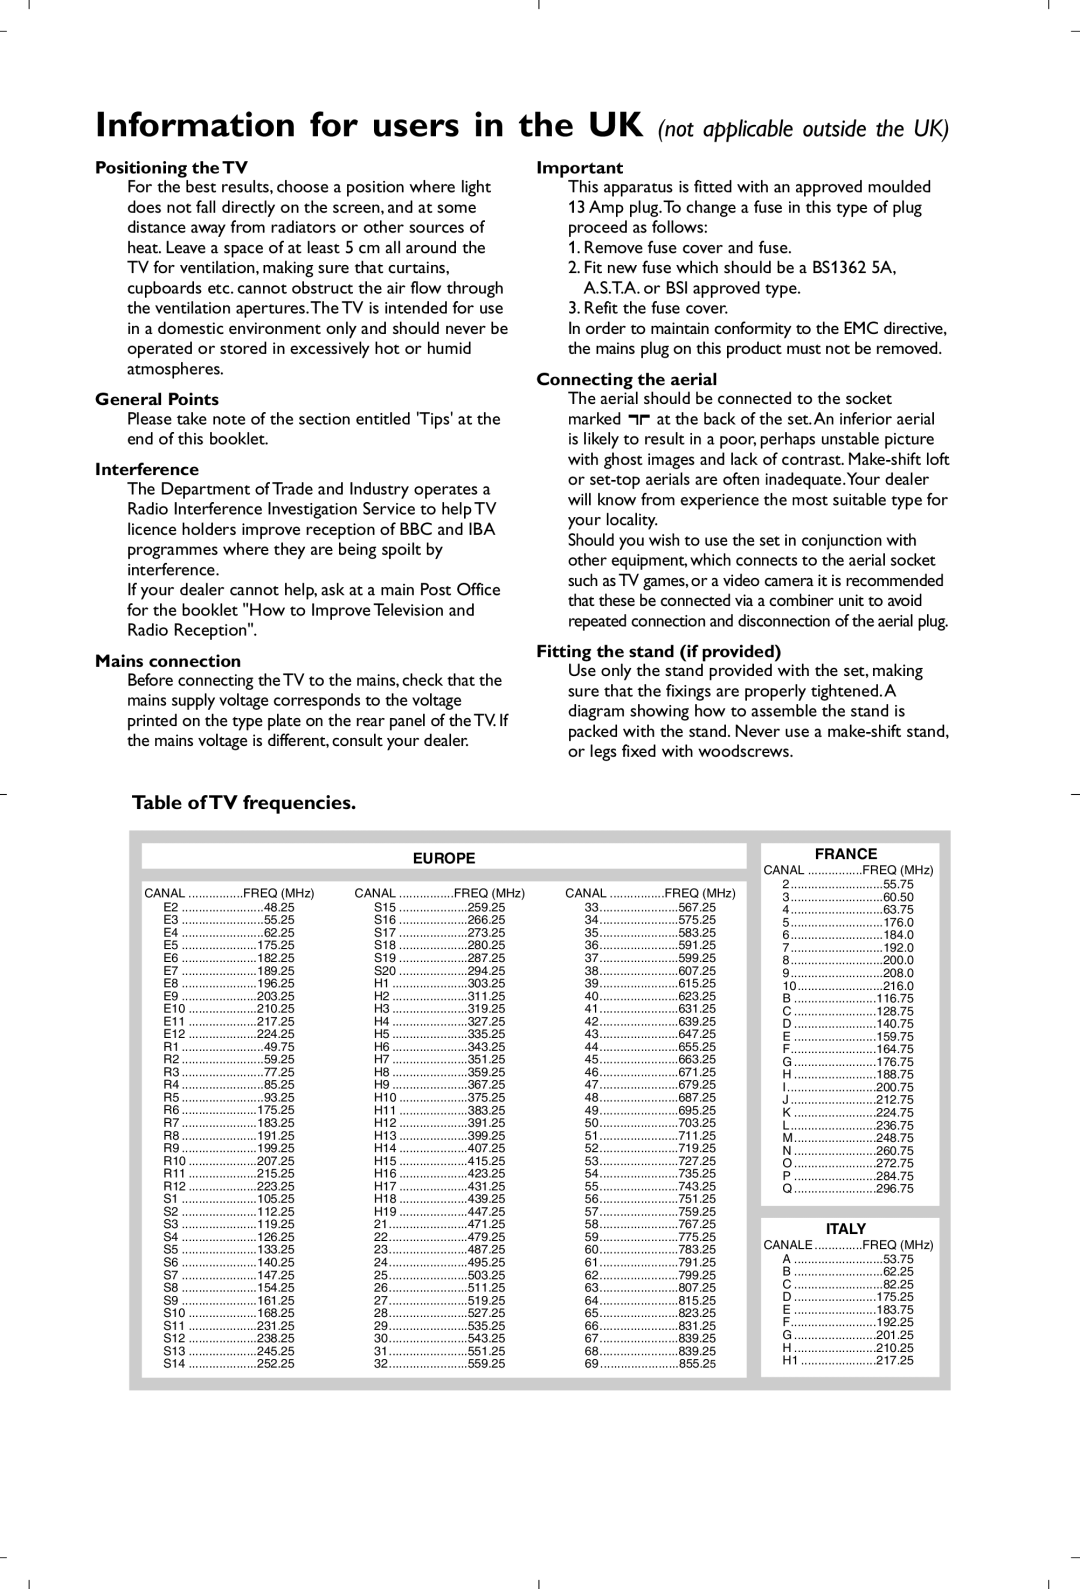 Philips 21PT4458/05 Table of TV frequencies, Information for users in the UK not applicable outside the UK, General Points 